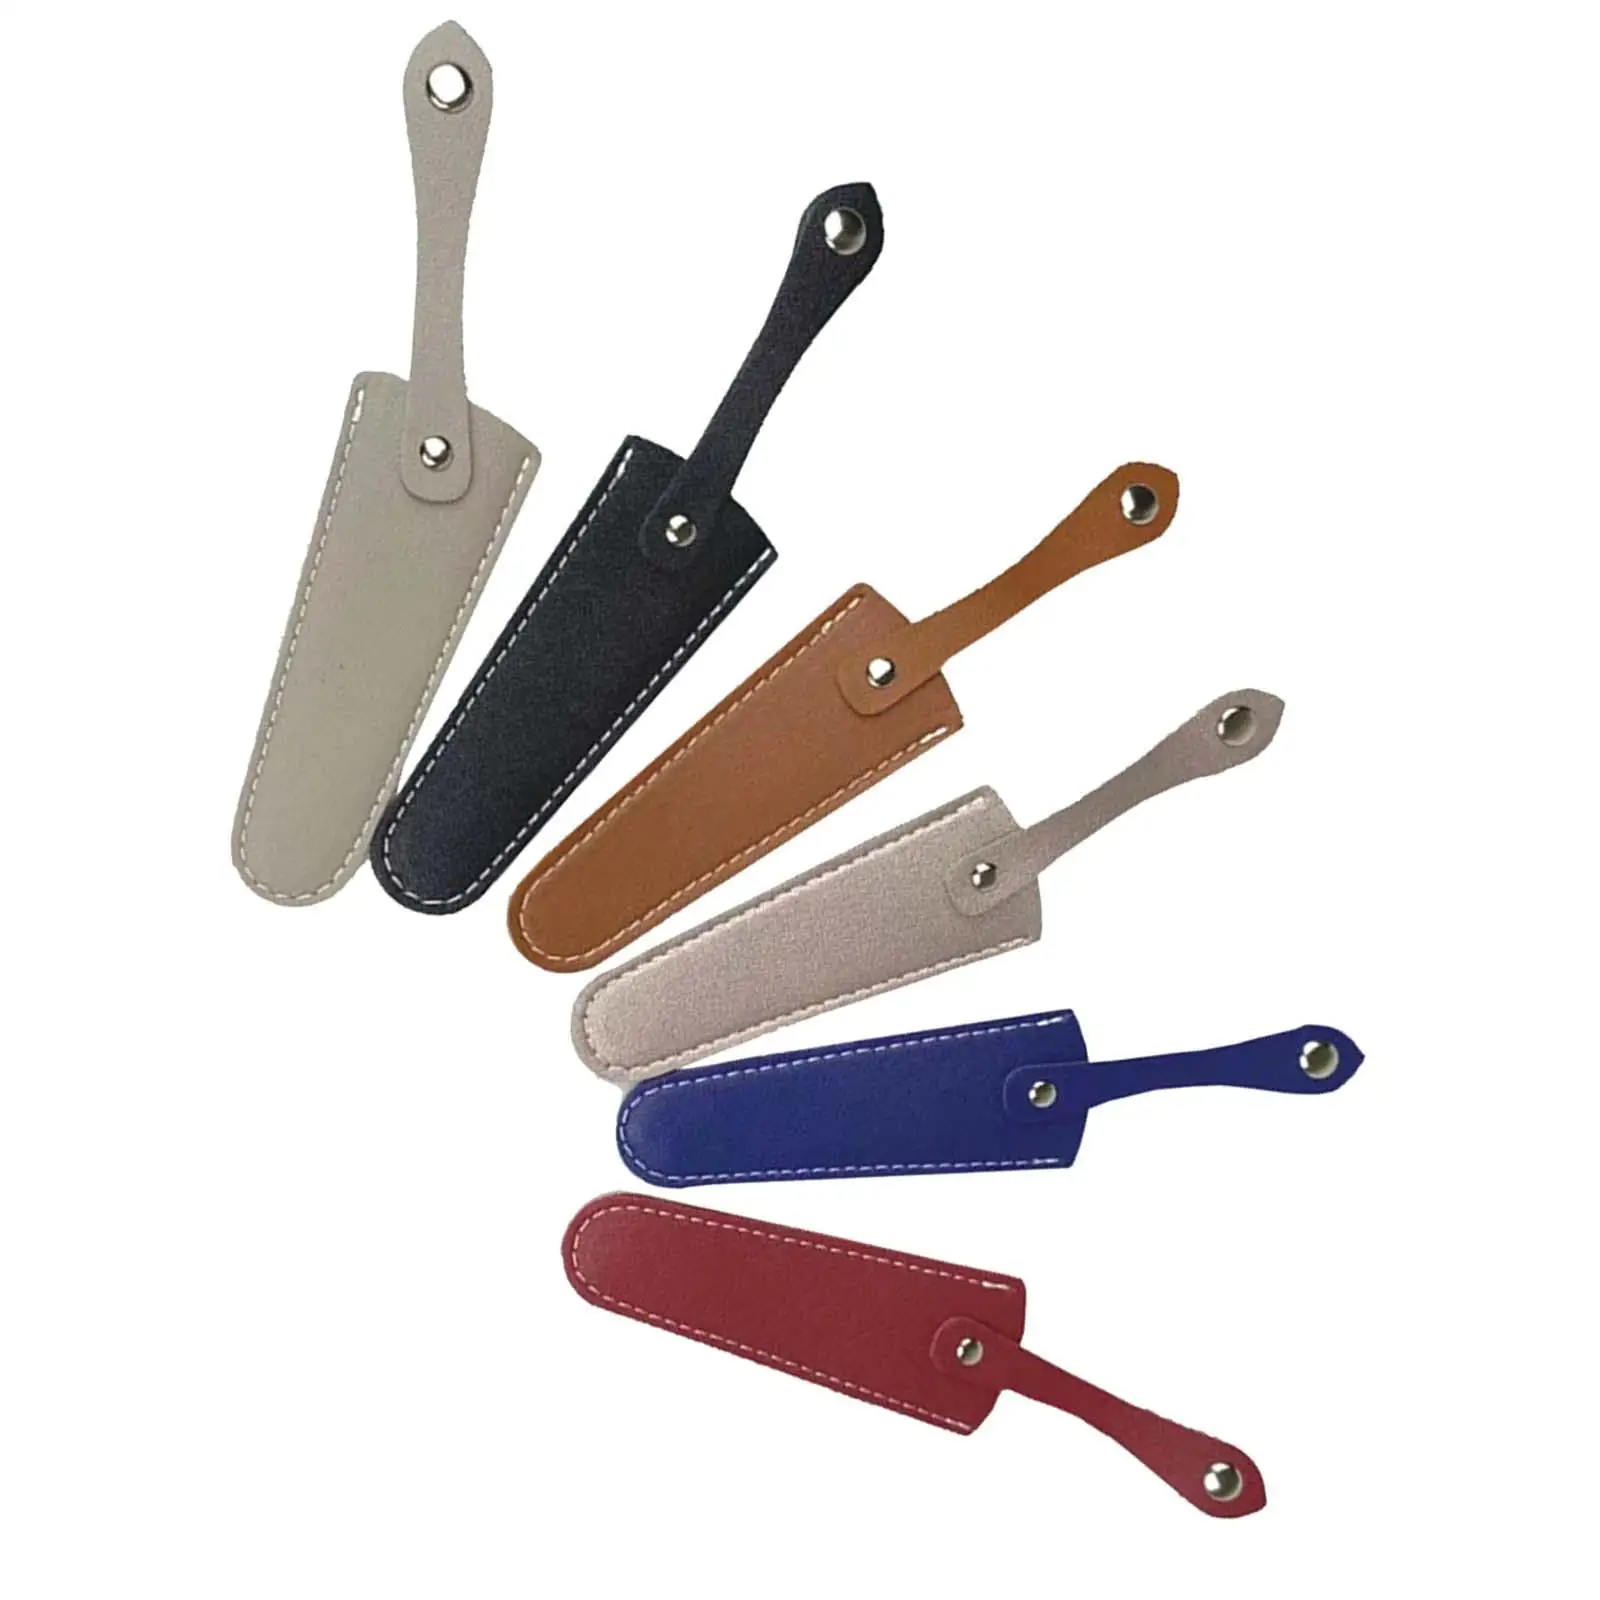 6Pcs Scissors Sheath PU Leather Collect Bags Compact Scissors Cover Protector for Embroidery Hair Cutting Scissors Hairdressers